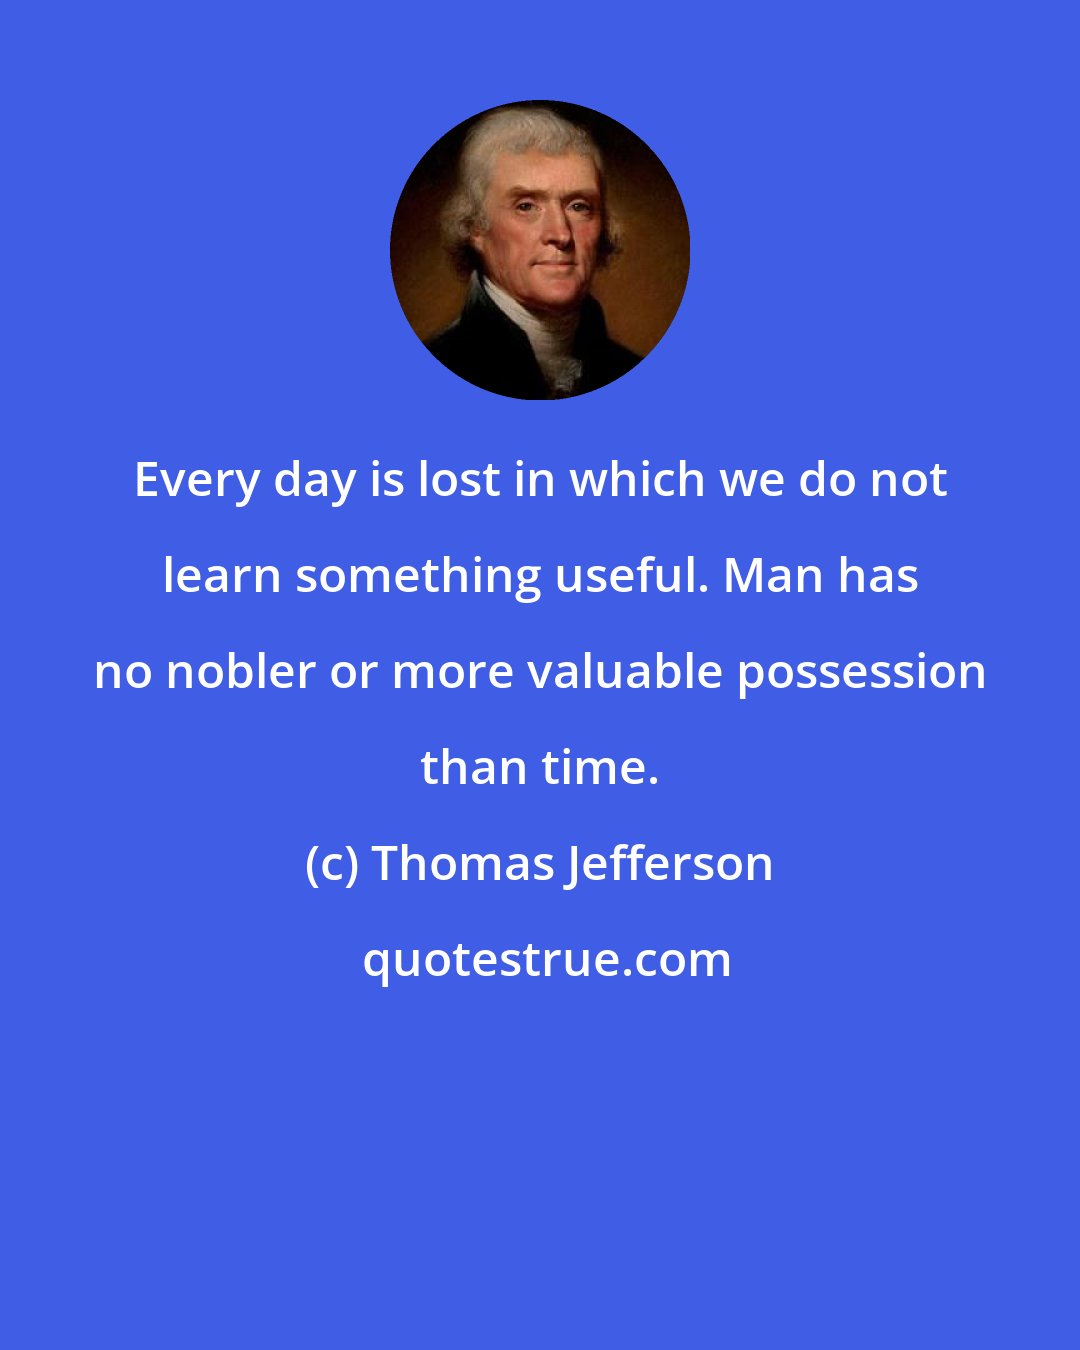 Thomas Jefferson: Every day is lost in which we do not learn something useful. Man has no nobler or more valuable possession than time.